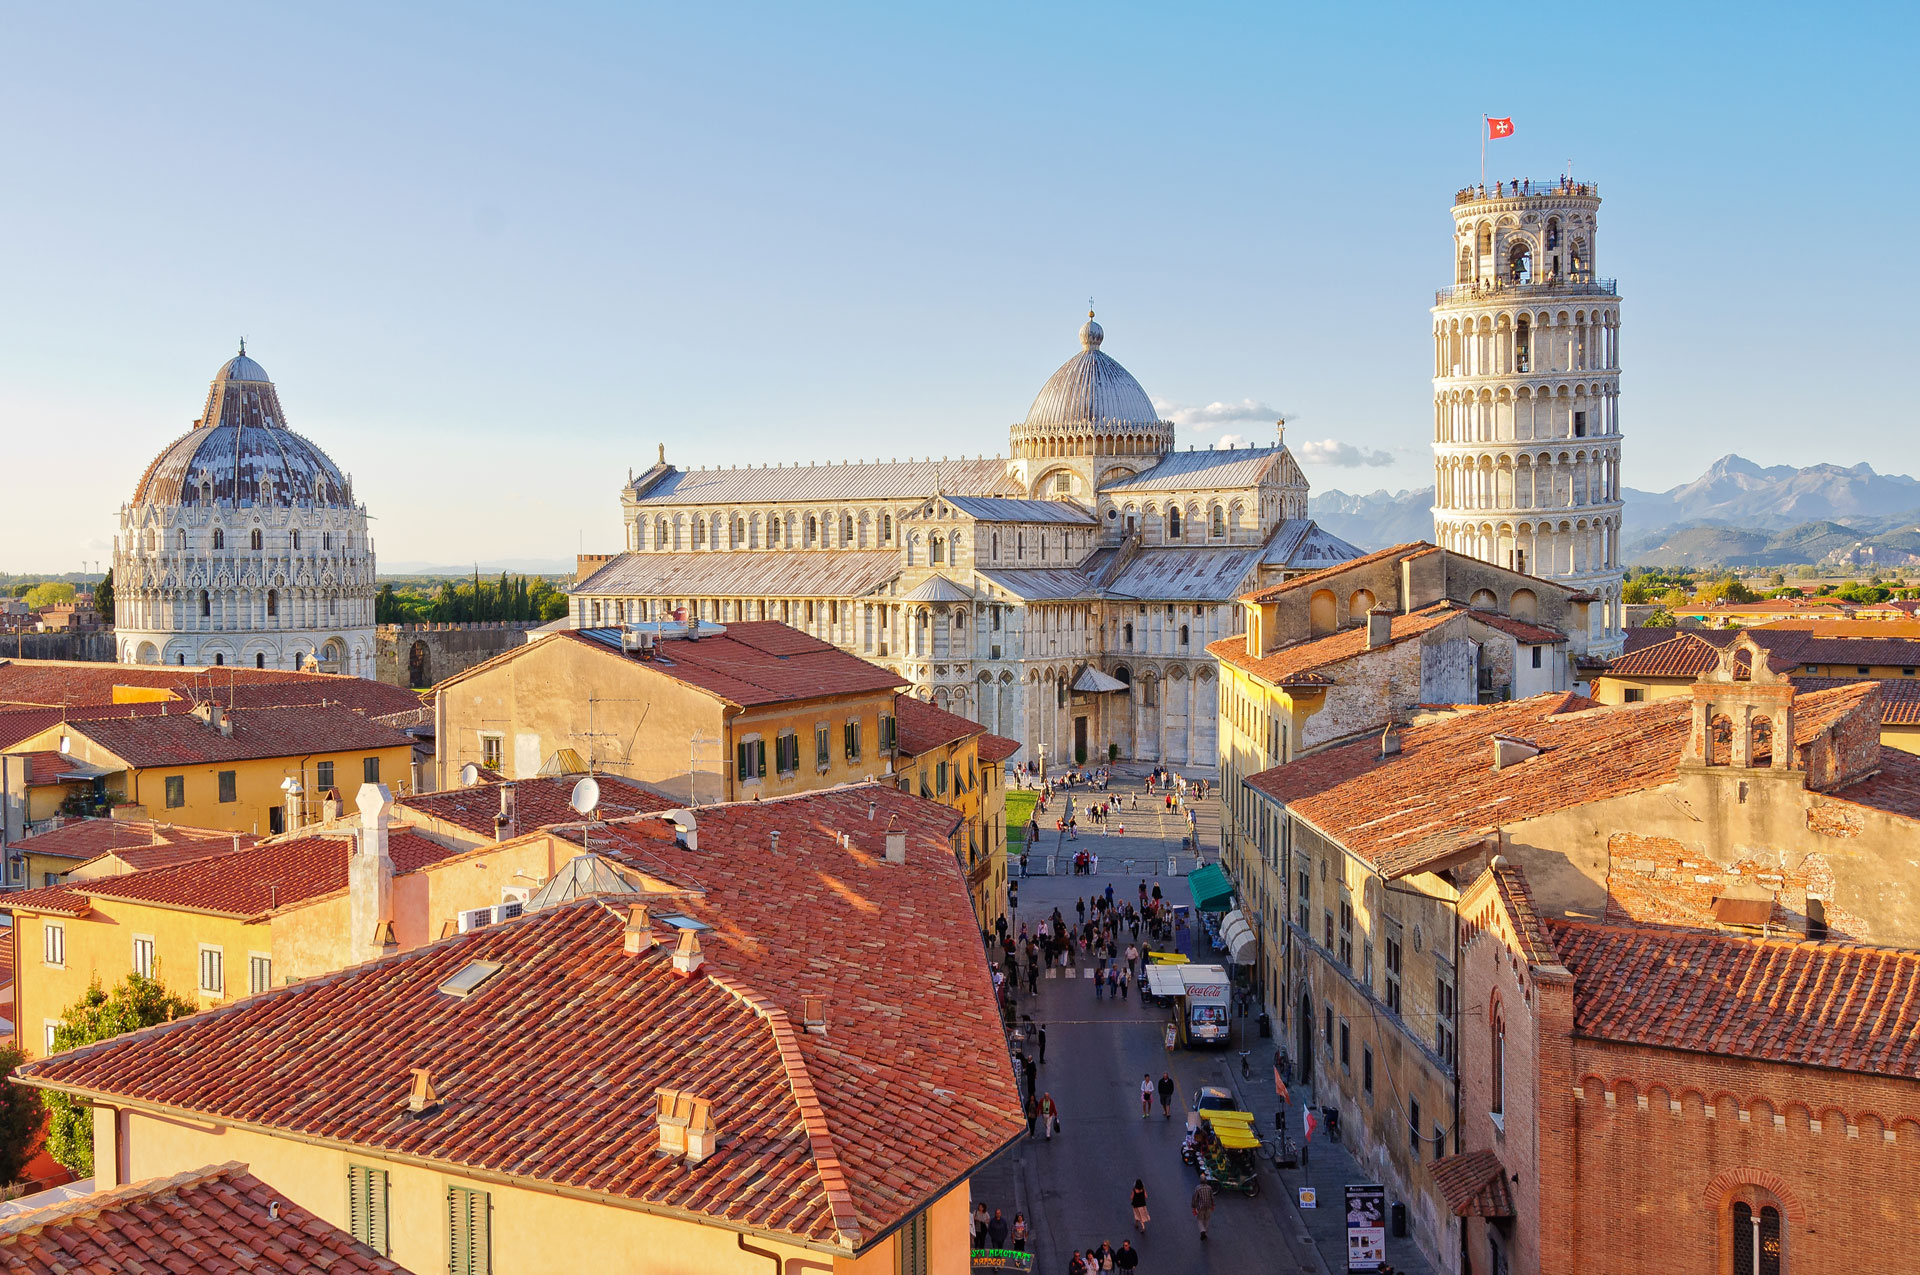 One day in Pisa, Must-see attractions, Tuscan cuisine, Local recommendations, 1920x1280 HD Desktop